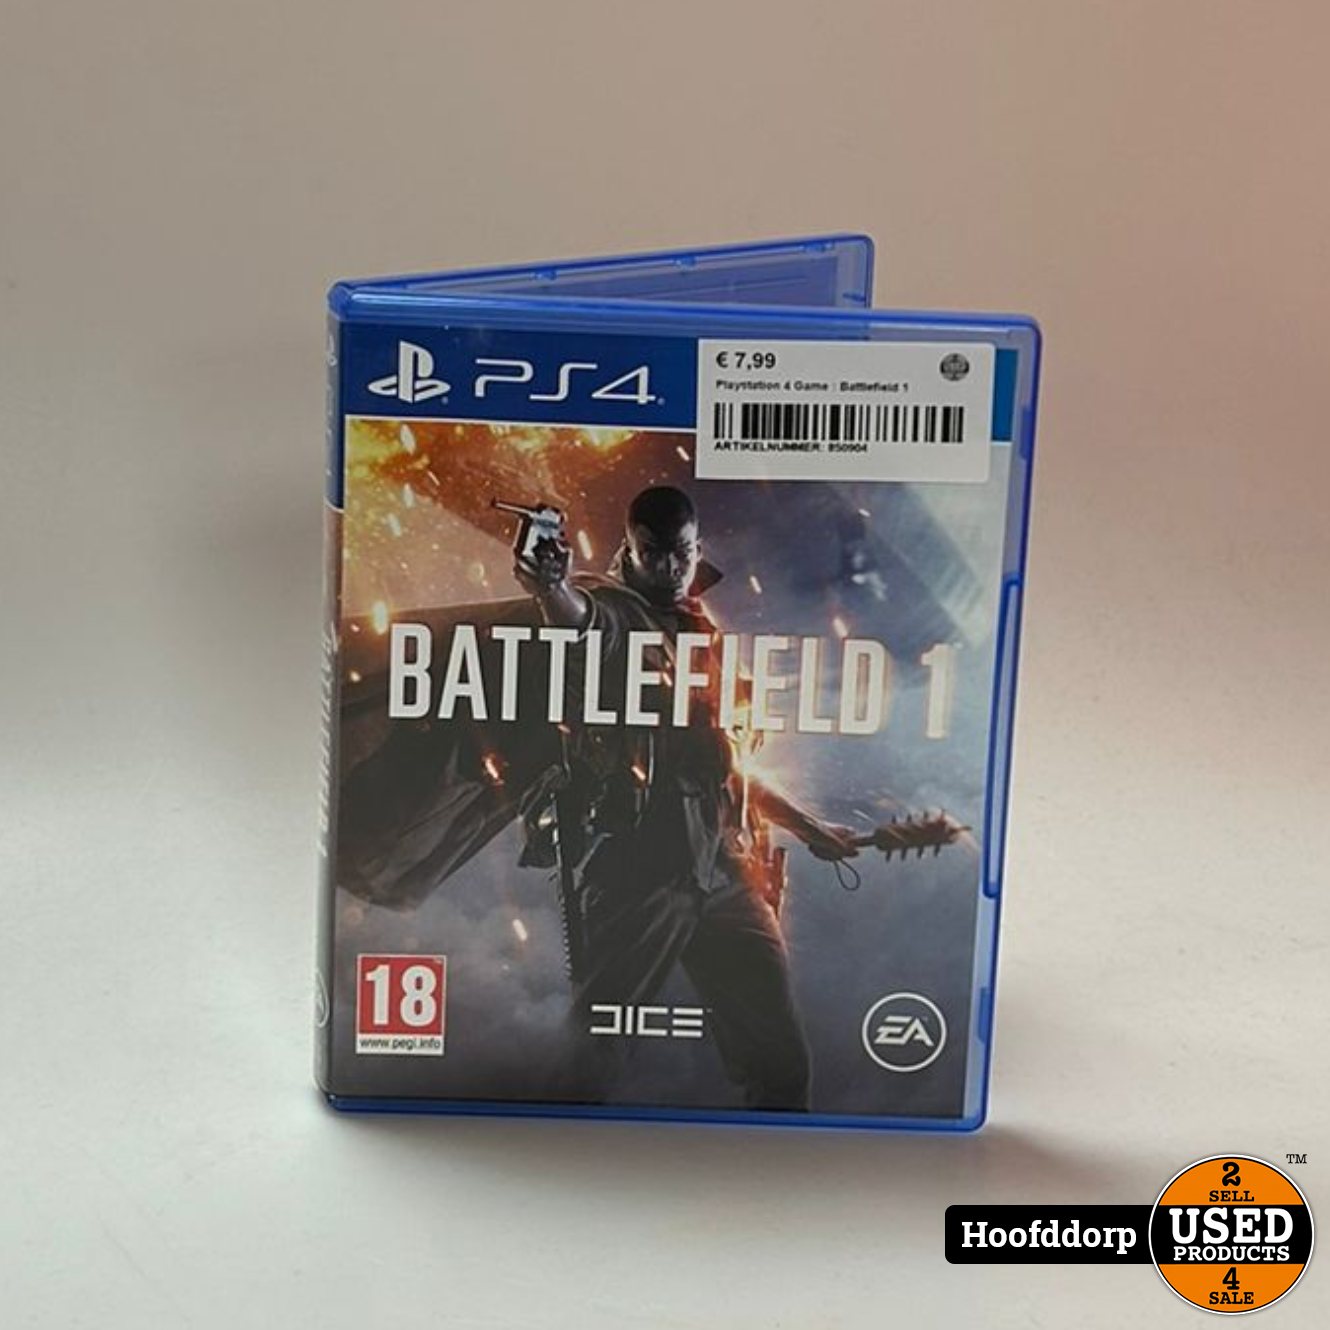 4 Game : Battlefield 1 - Used Products